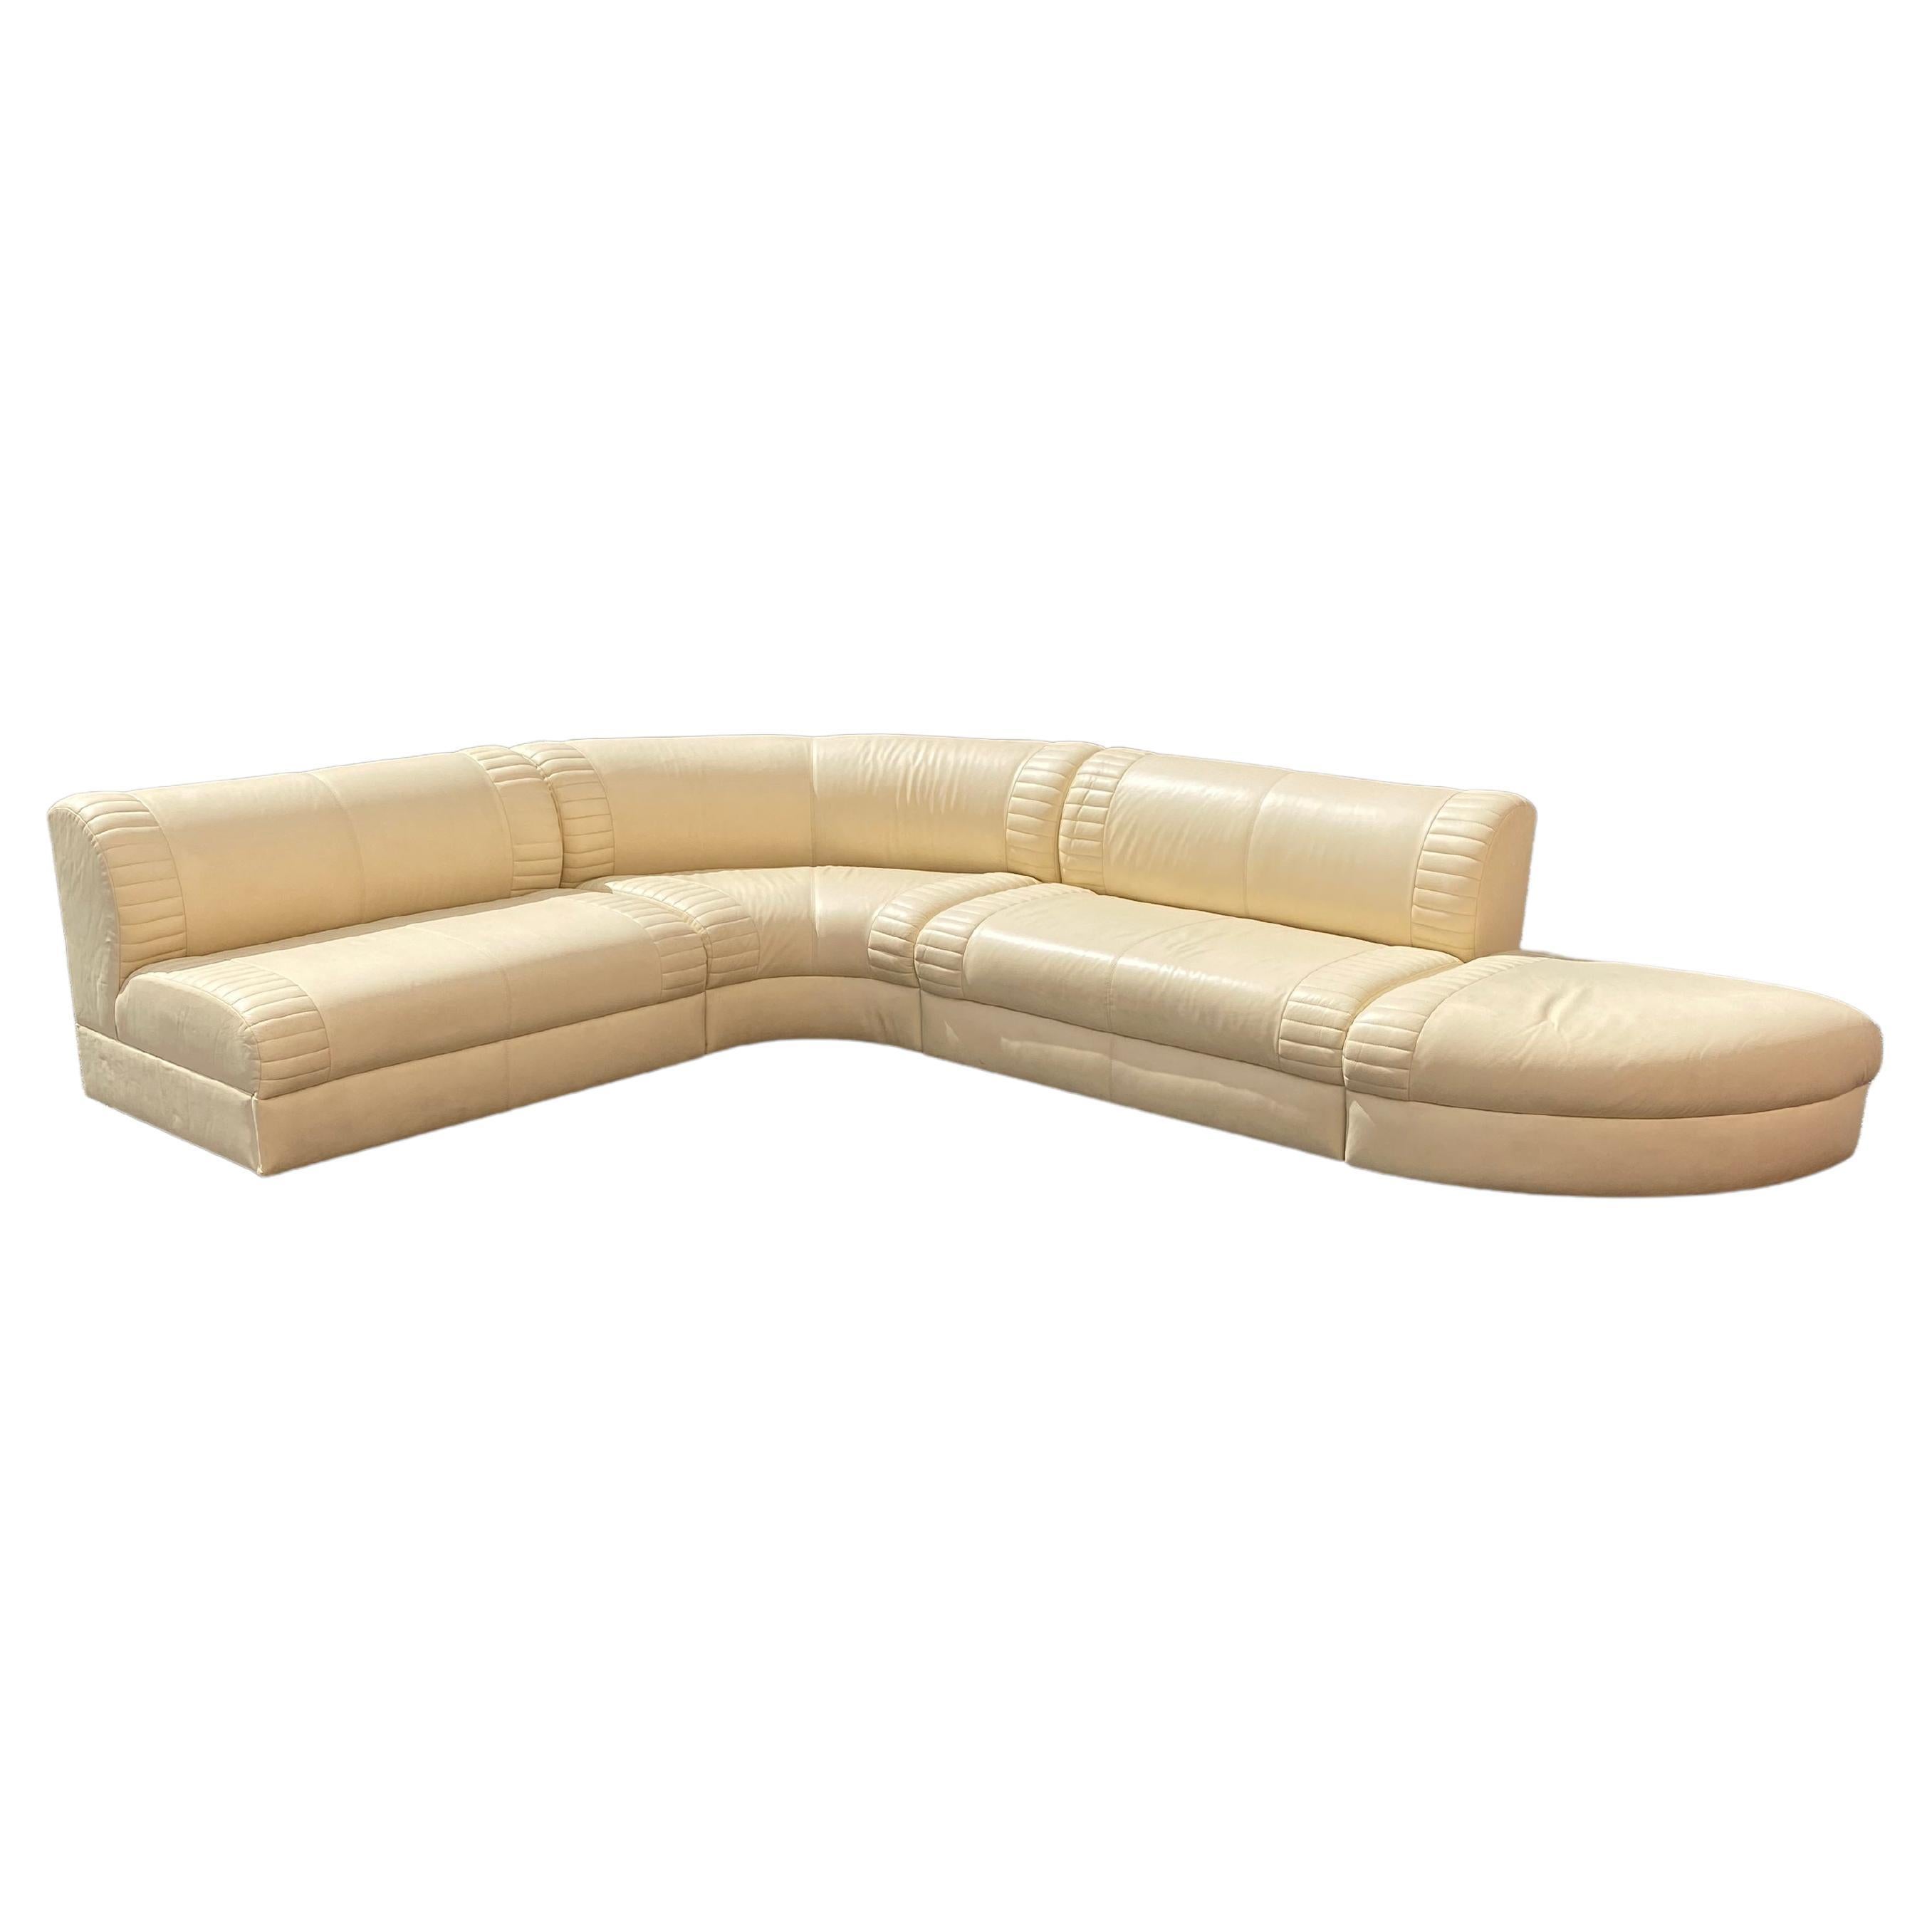 1980s Weiman Serpentine Modular Beige Leather Sectional For Sale